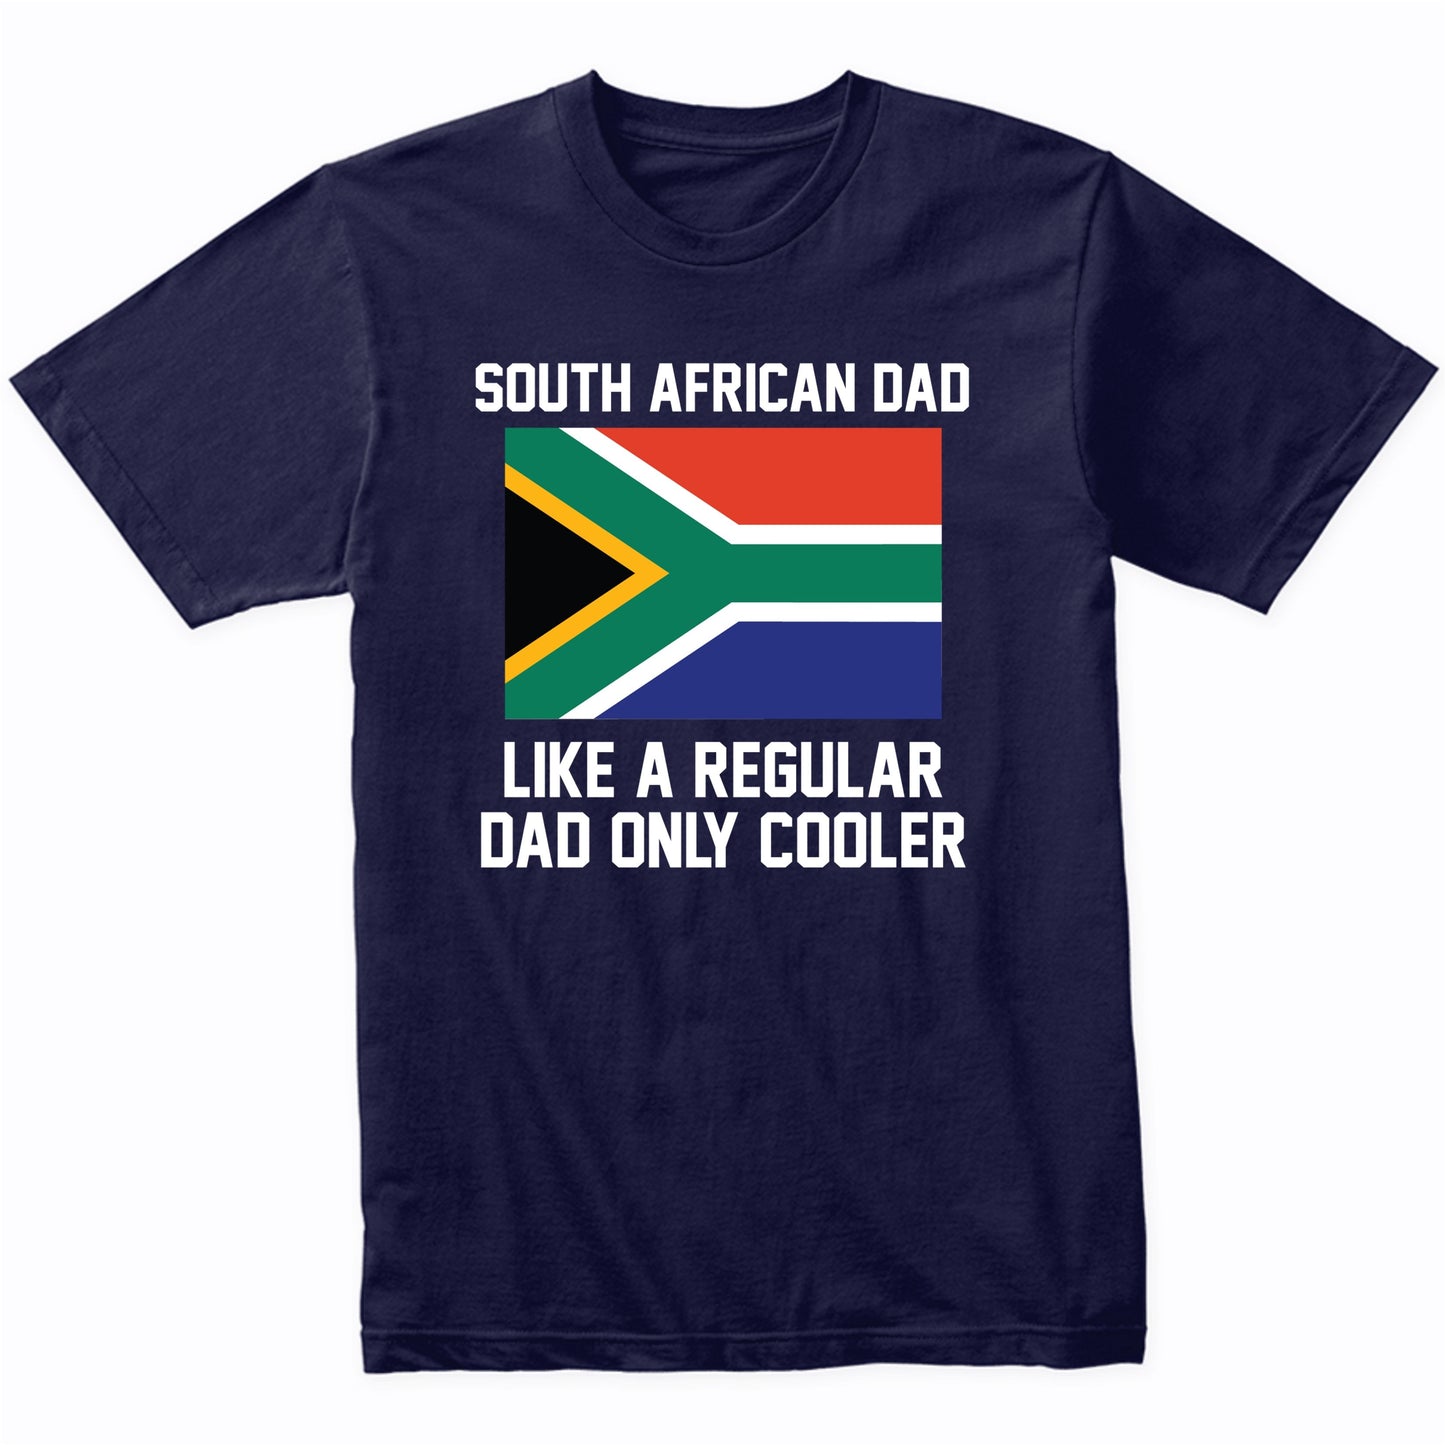 South African Dad Like A Regular Dad Only Cooler Shirt